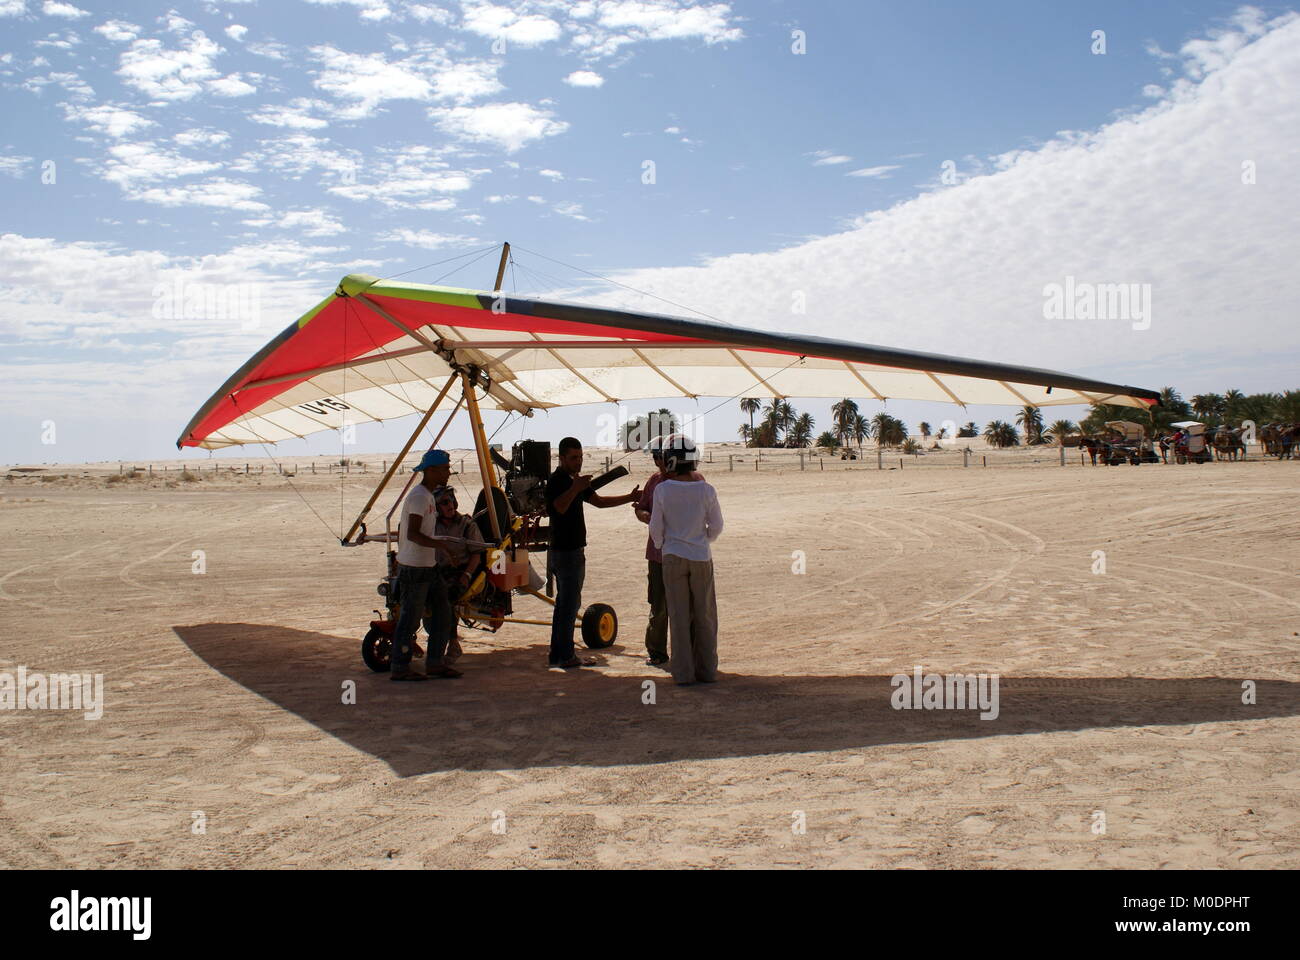 Receiving instructions before going up in a Microlight plane over the Sahara desert, Douz, Kebili district, Tunisia Stock Photo